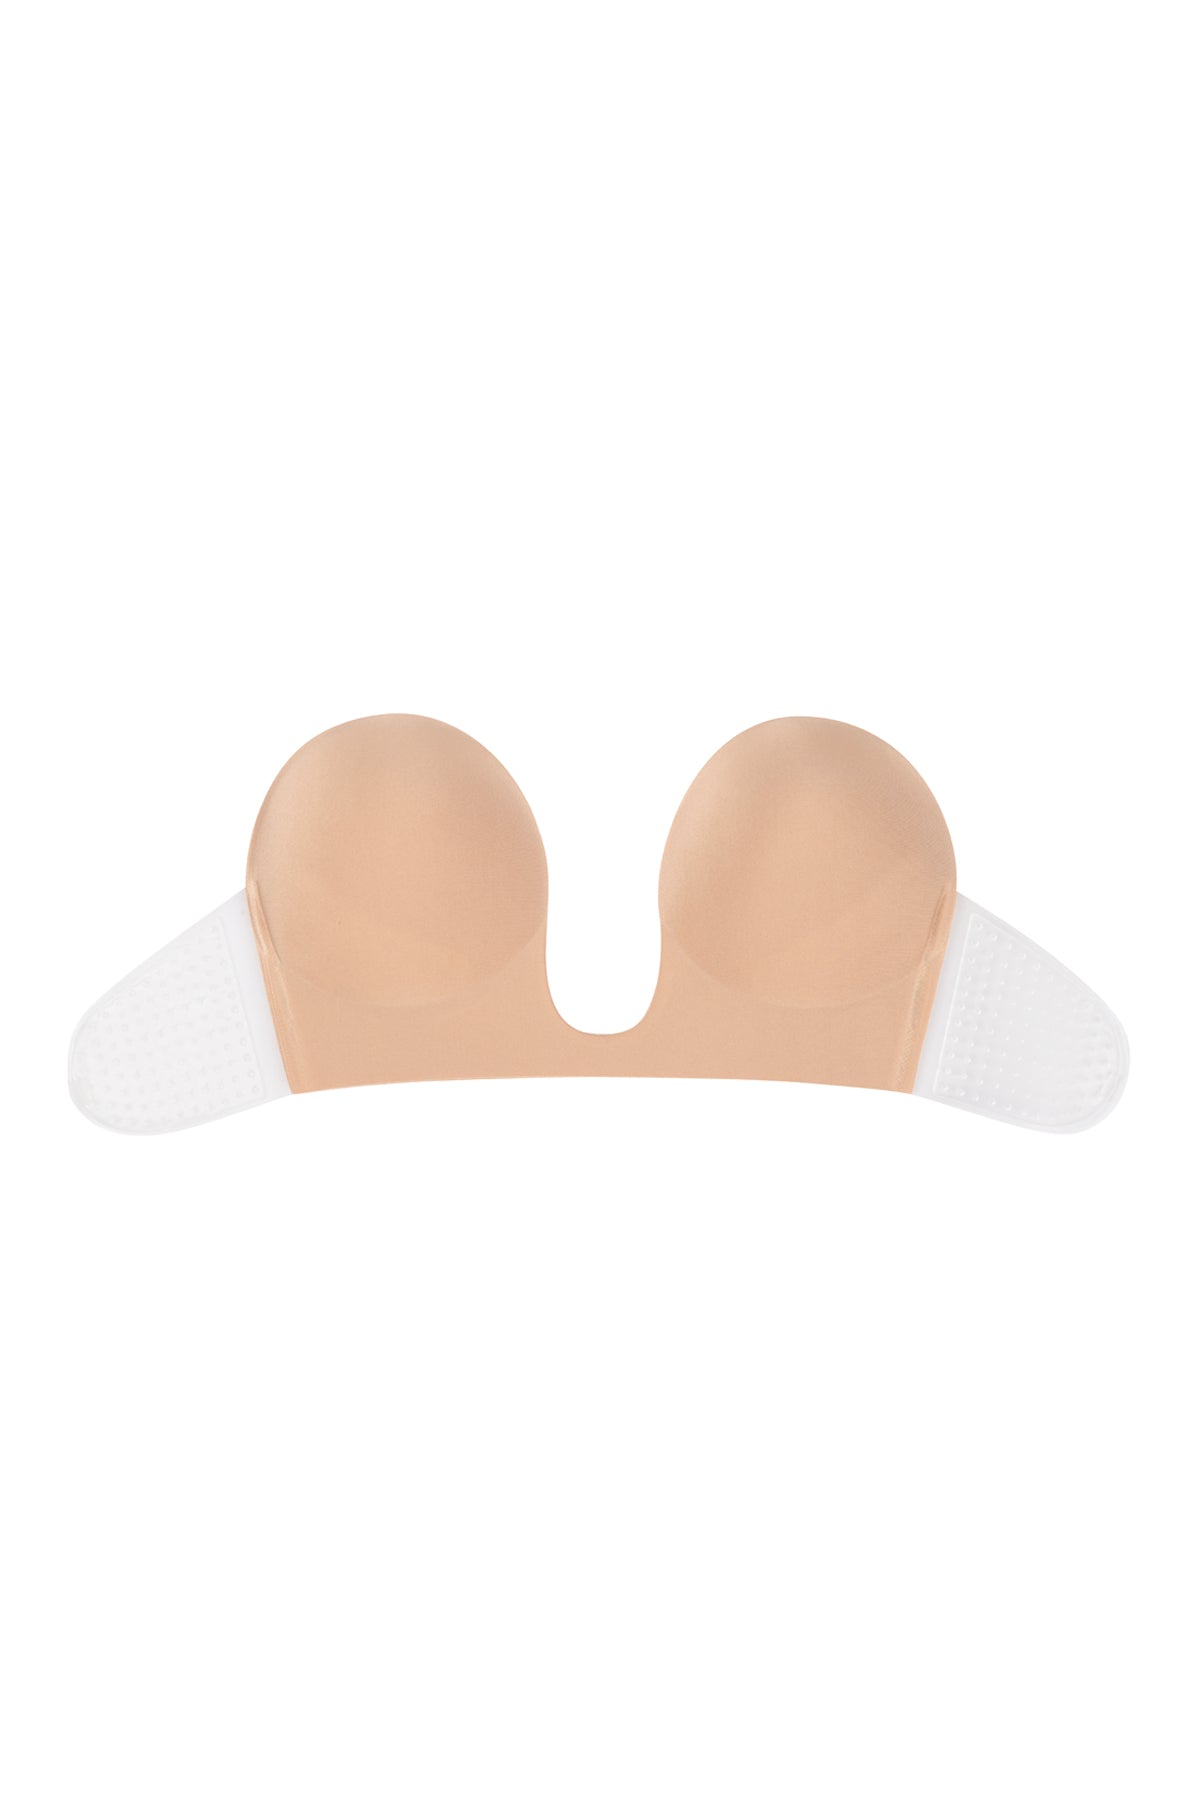 STRAPLESS PUSH UP ADHESIVE NU BRA WITH NIPPLE TAPE AND TRANSPARENT STRAP